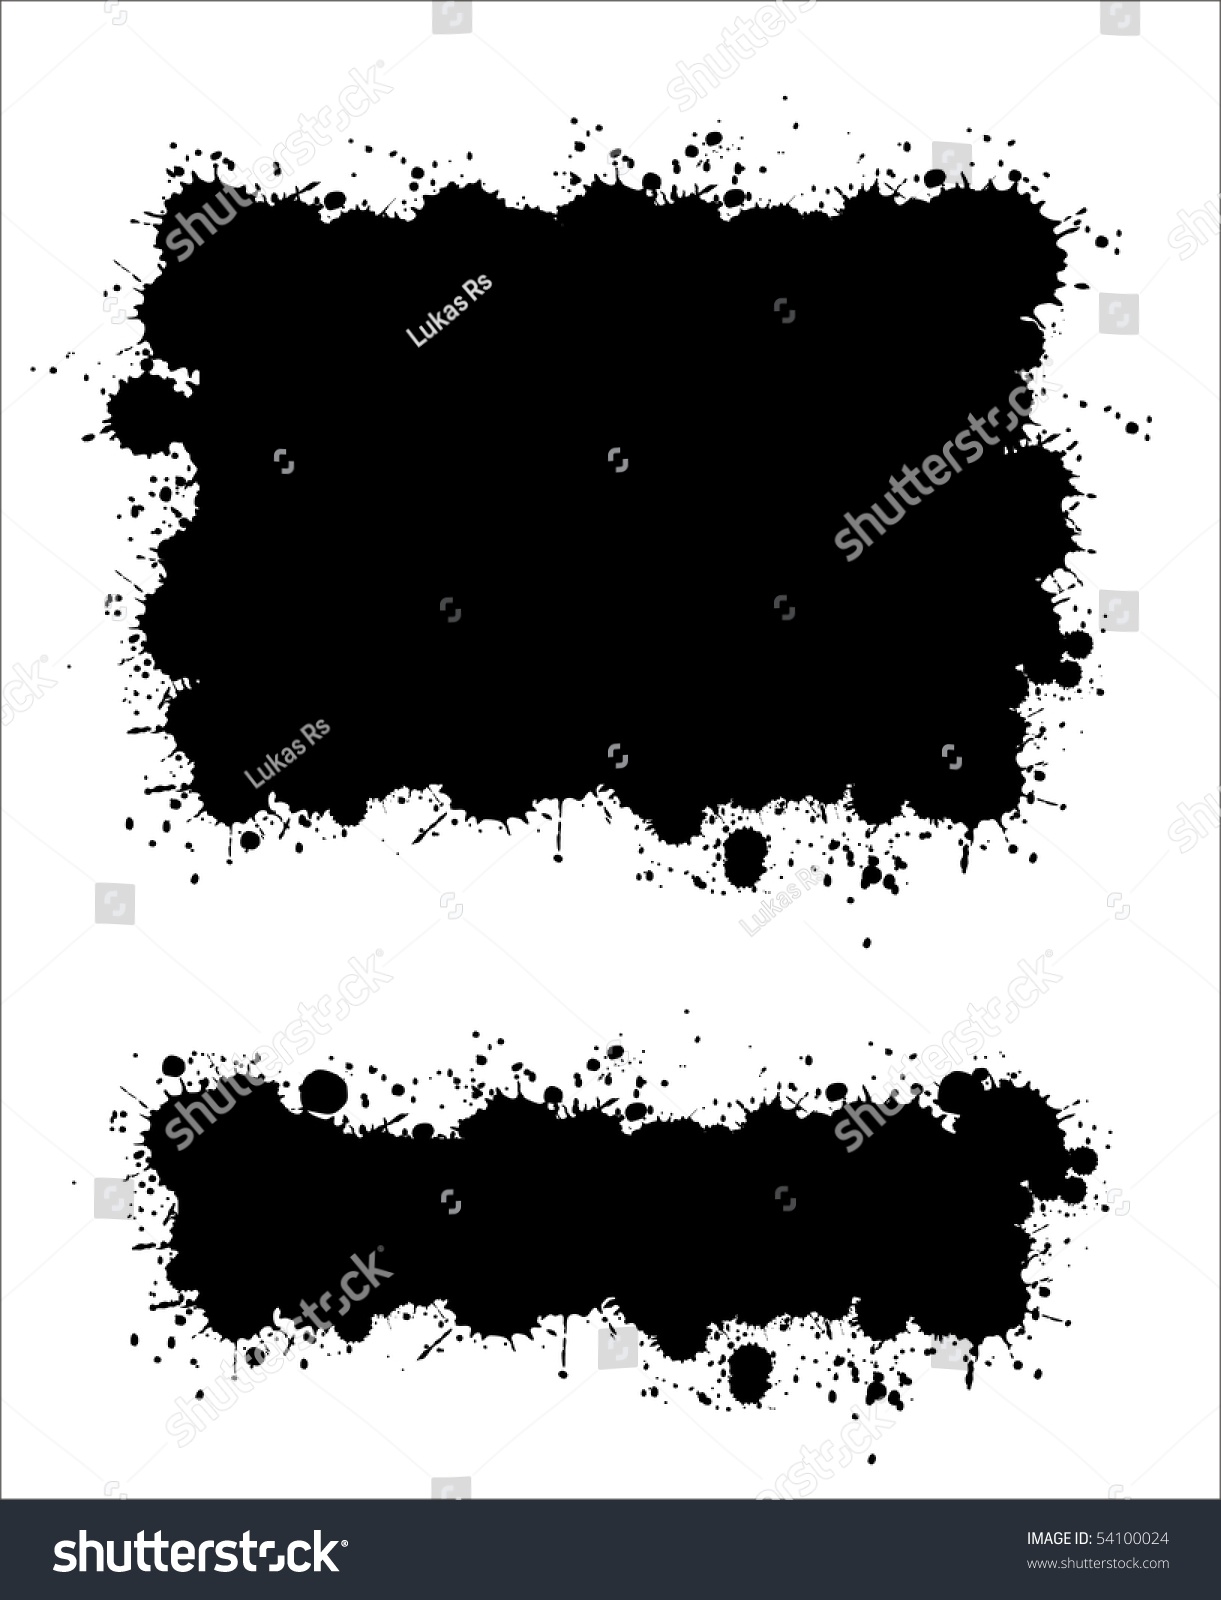 Two different ink splat banners vector #54100024